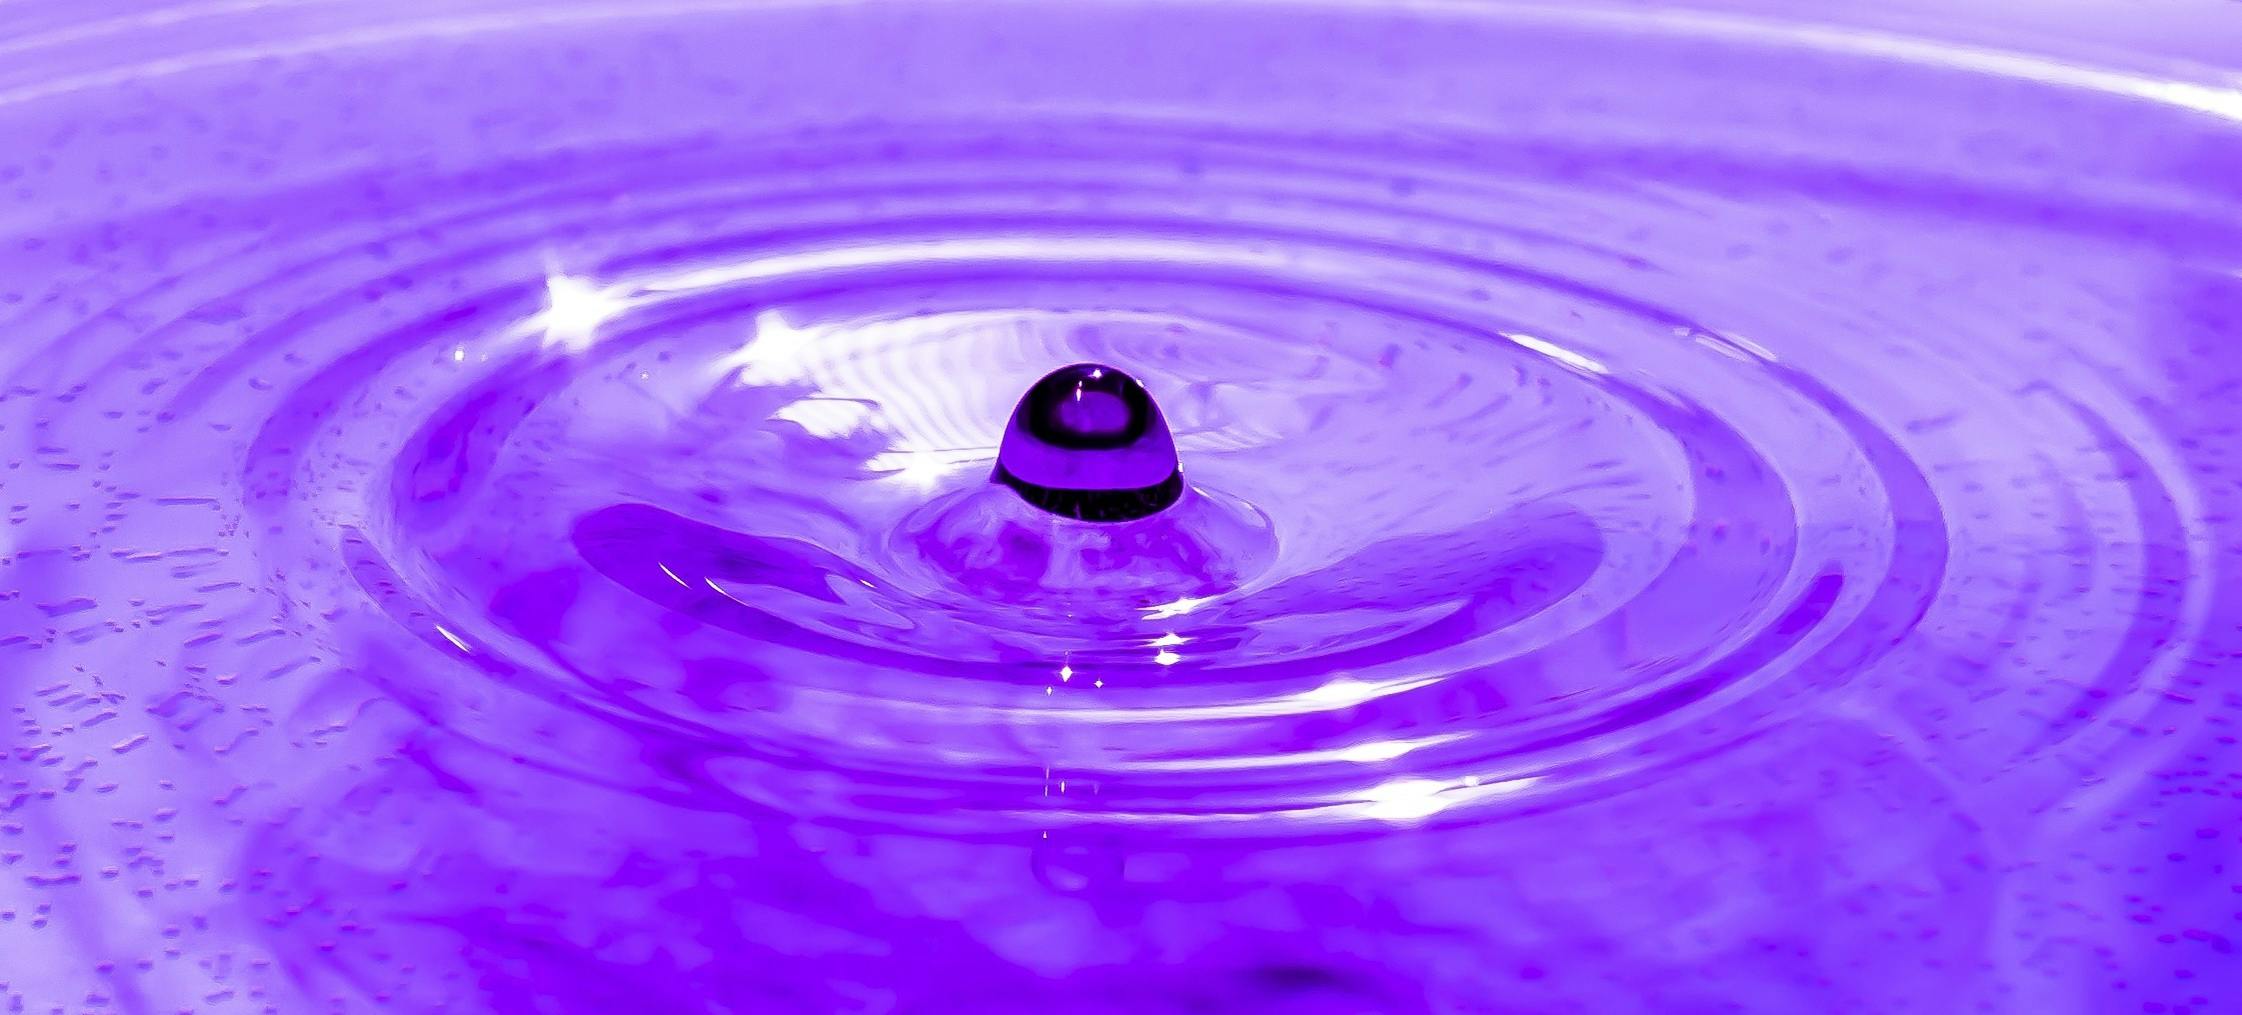 Purple Photos, Download The BEST Free Purple Stock Photos & HD Images